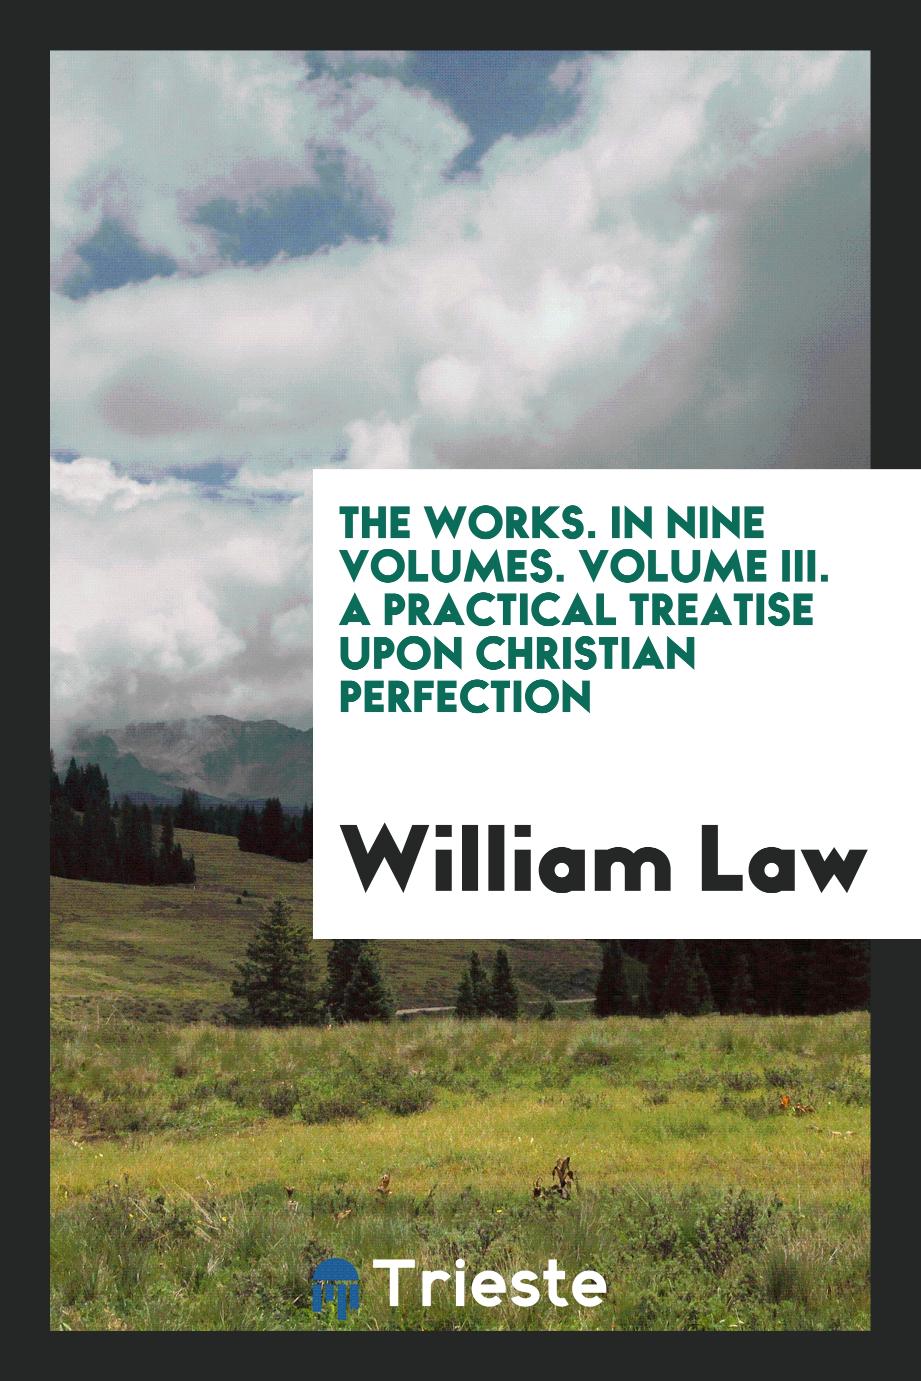 The Works. In Nine Volumes. Volume III. A Practical Treatise upon Christian Perfection